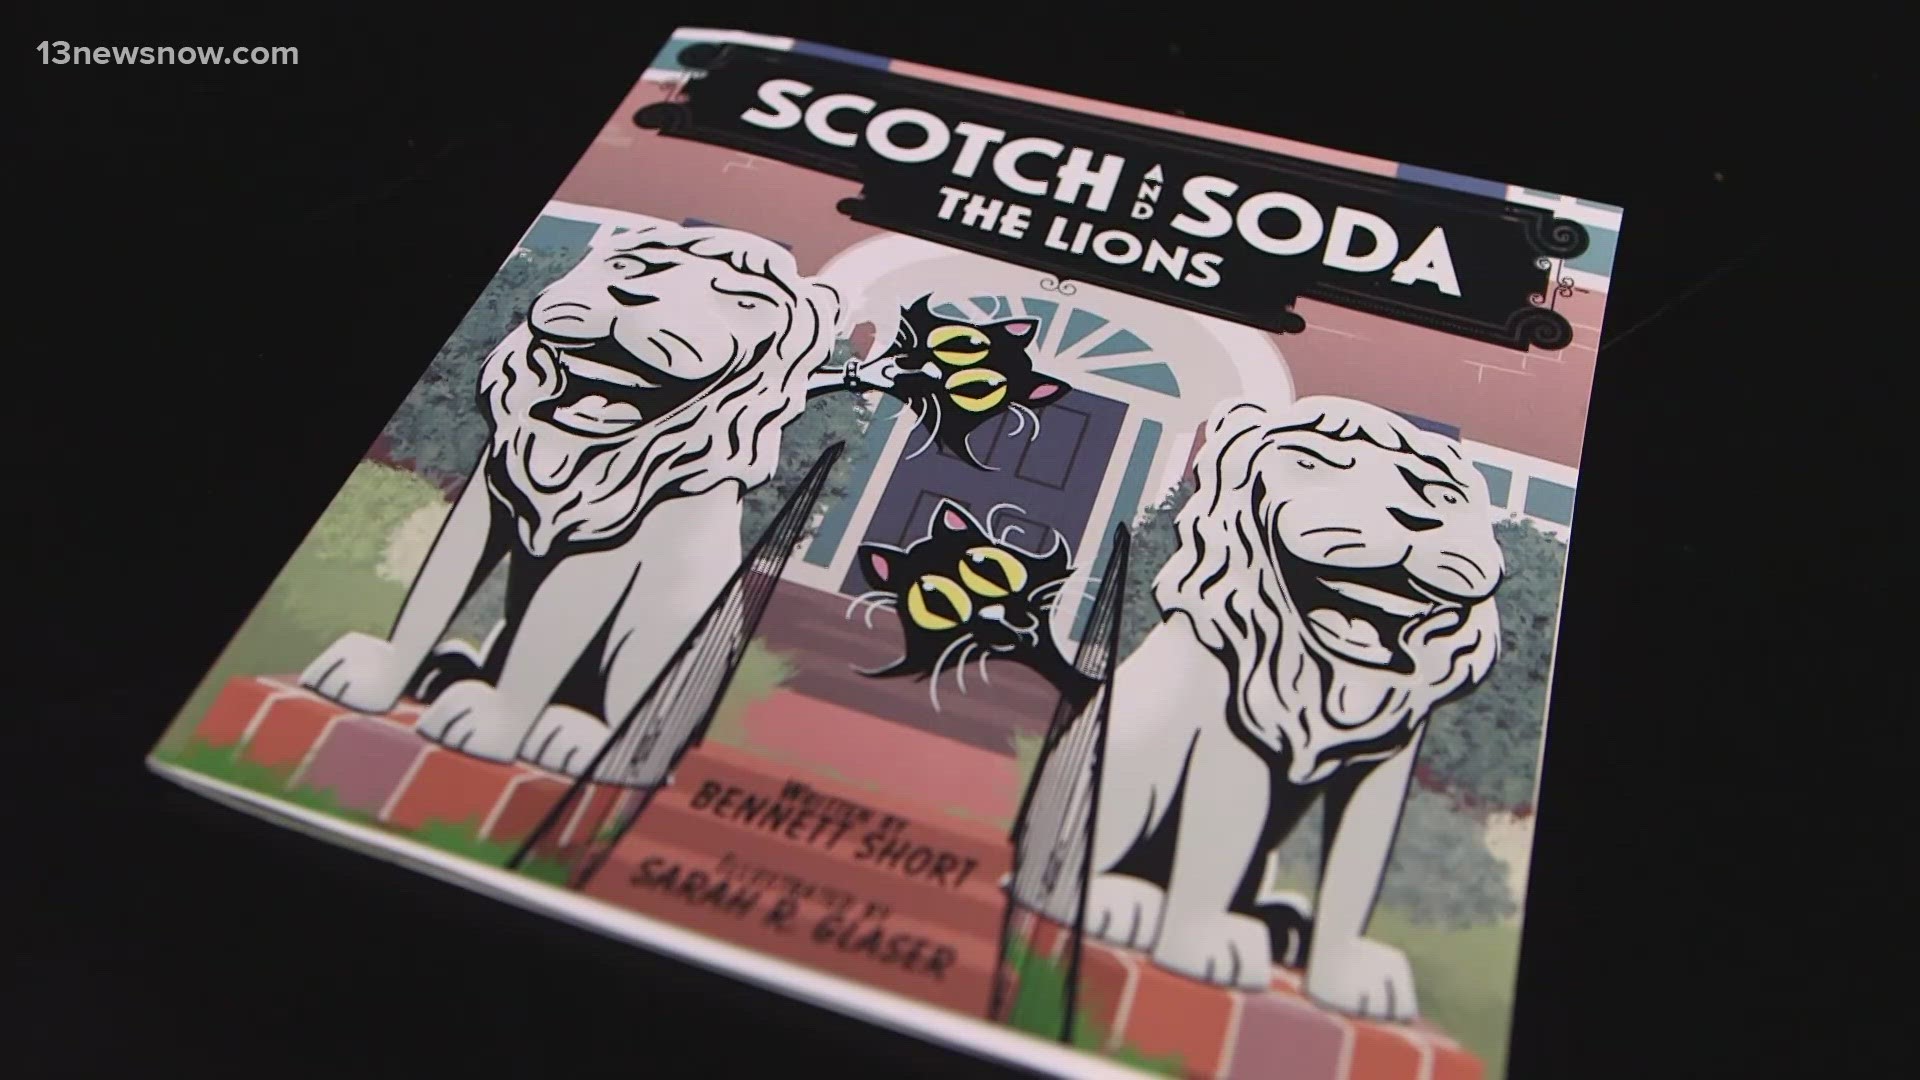 The lion statues on Hampton Boulevard known as *scotch and soda* get new costumes every couple of weeks.